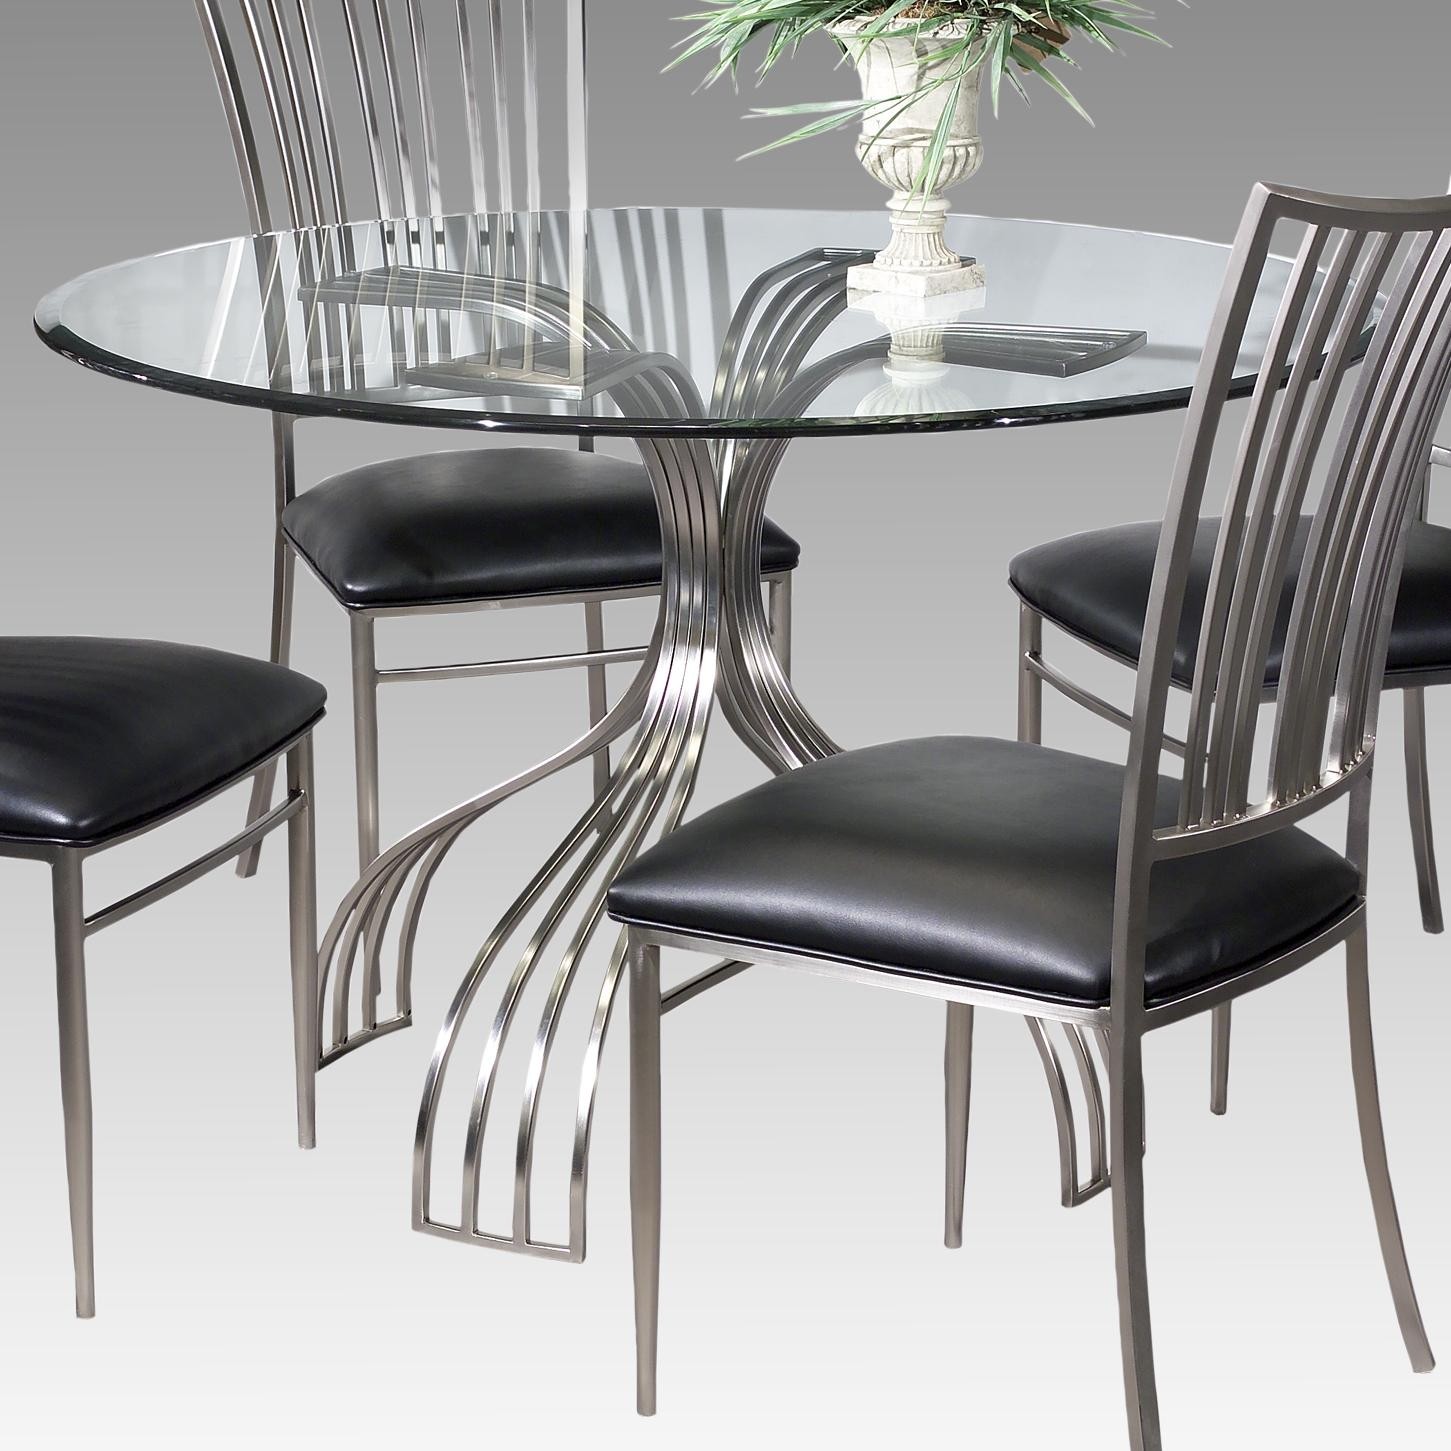 Chintaly glass topped round pedestal dining table with slatted metal